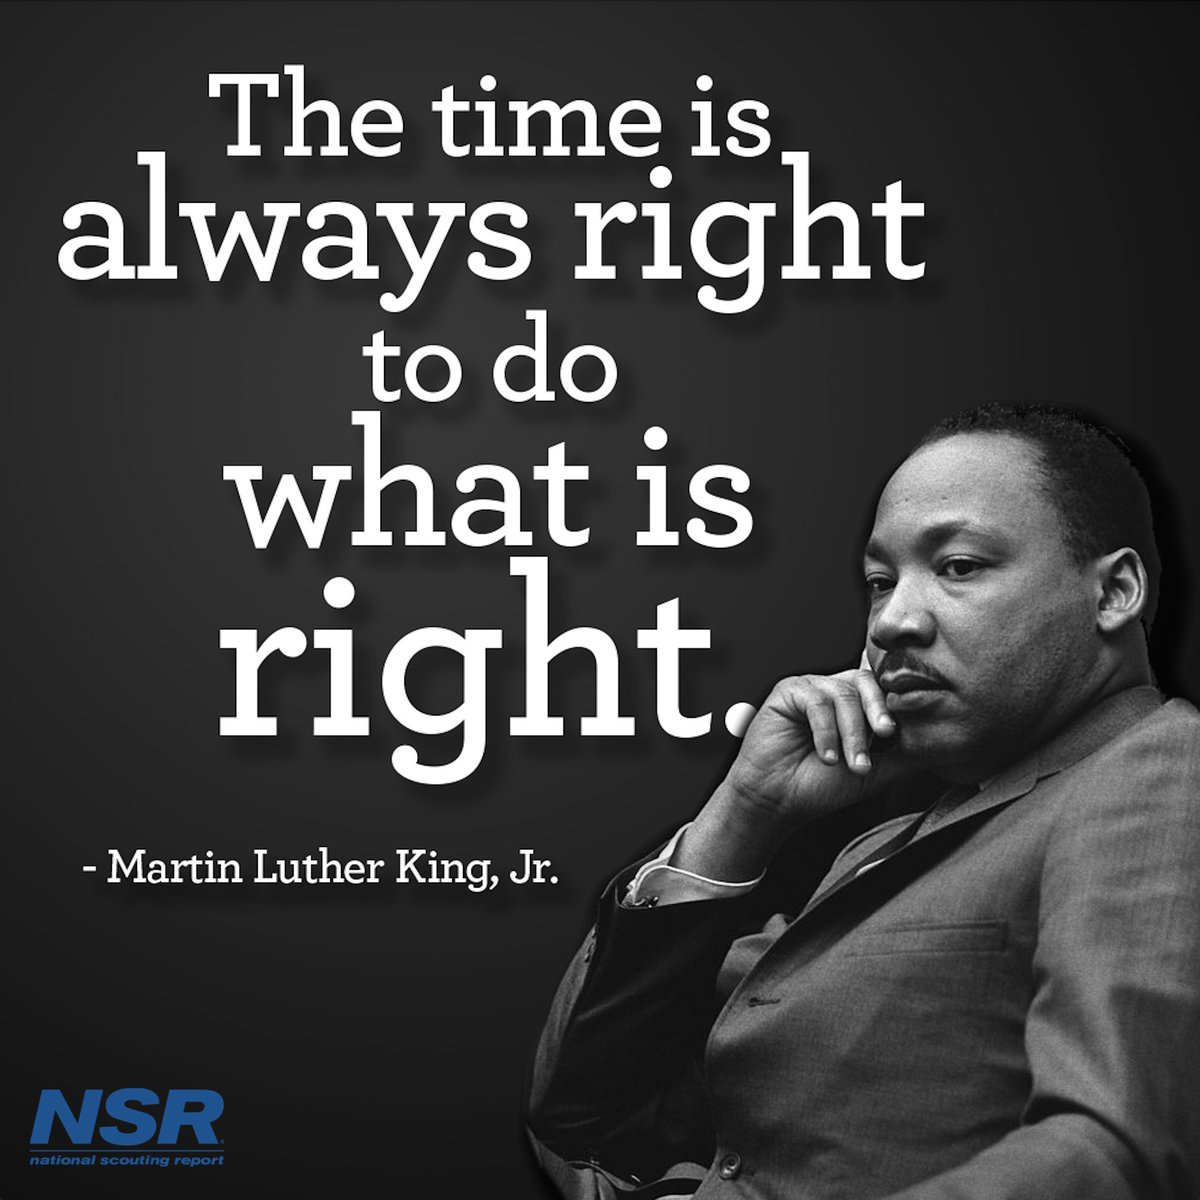 🌟 Honoring the legacy of Martin Luther King Jr. on #MLKDay today! Let's always remember these simple, but powerful words: 'The time is always right to do what is right.' Together, let's build a world where doing what is right is our guiding light. #Inspiration #MLKJrLegacy ✨